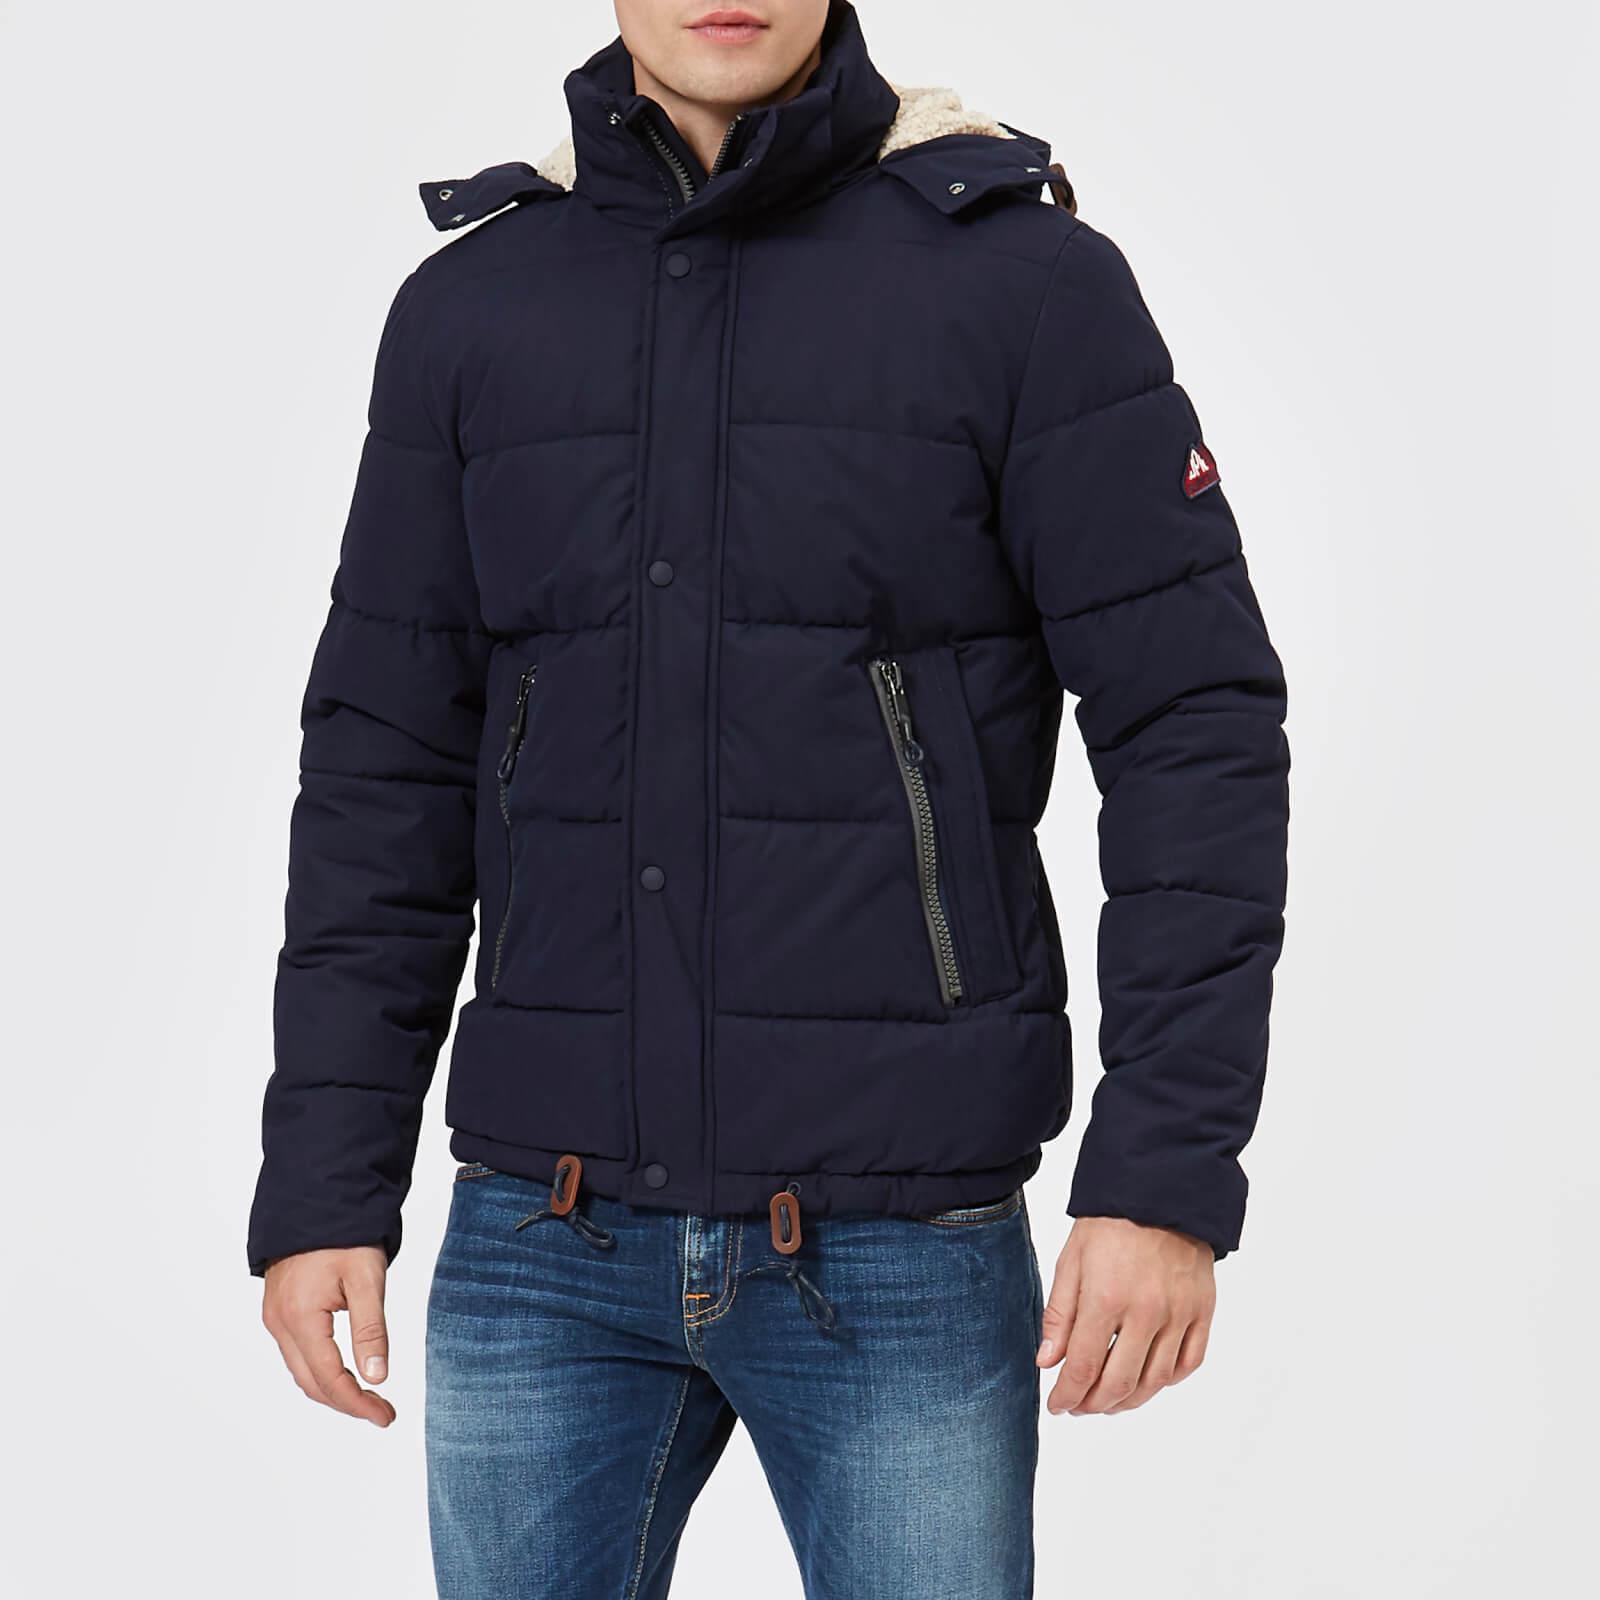 Superdry Synthetic New Academy Jacket in Navy (Blue) for Men - Lyst